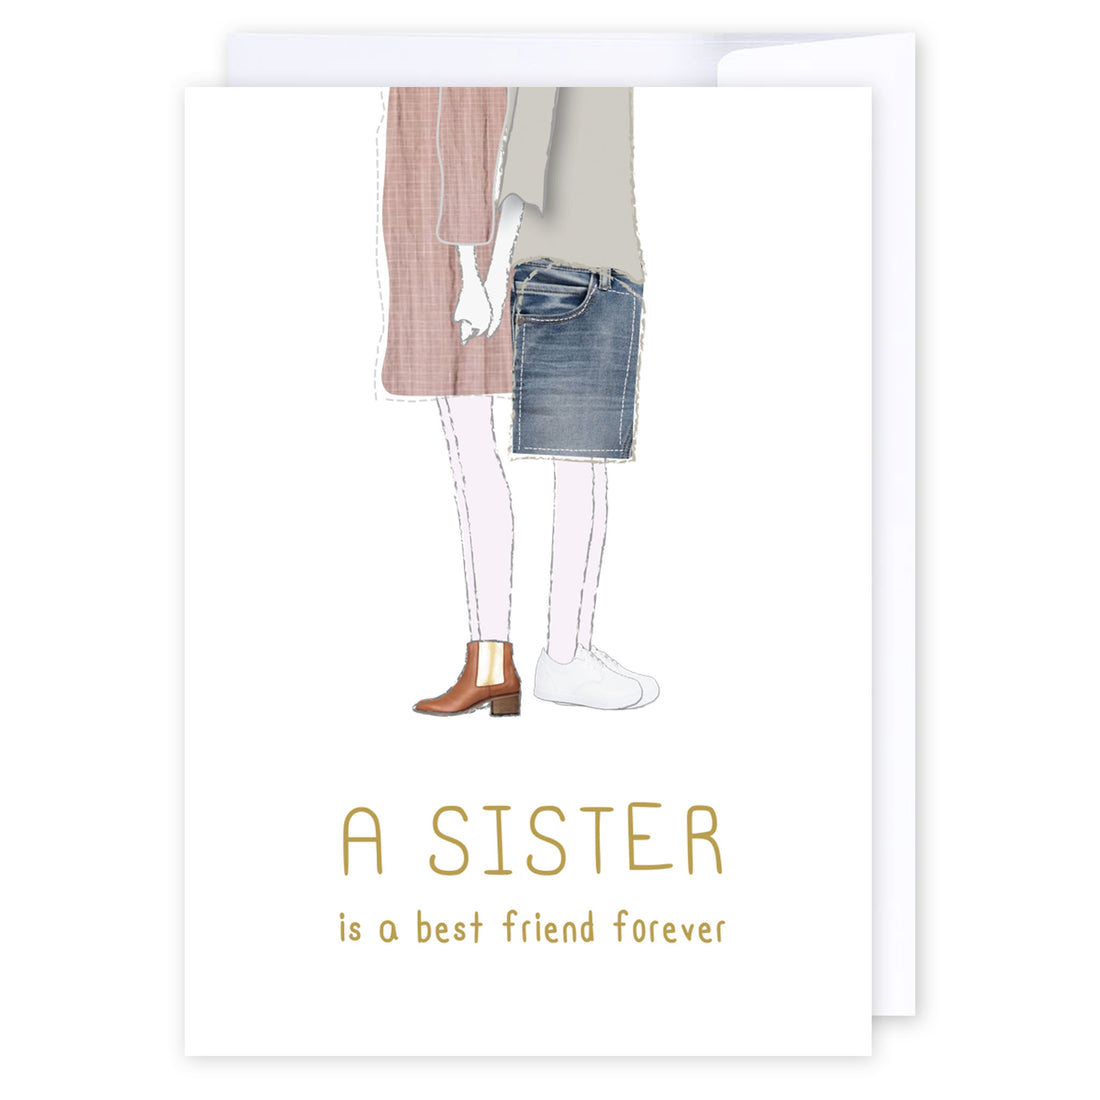 A sister is a best friend